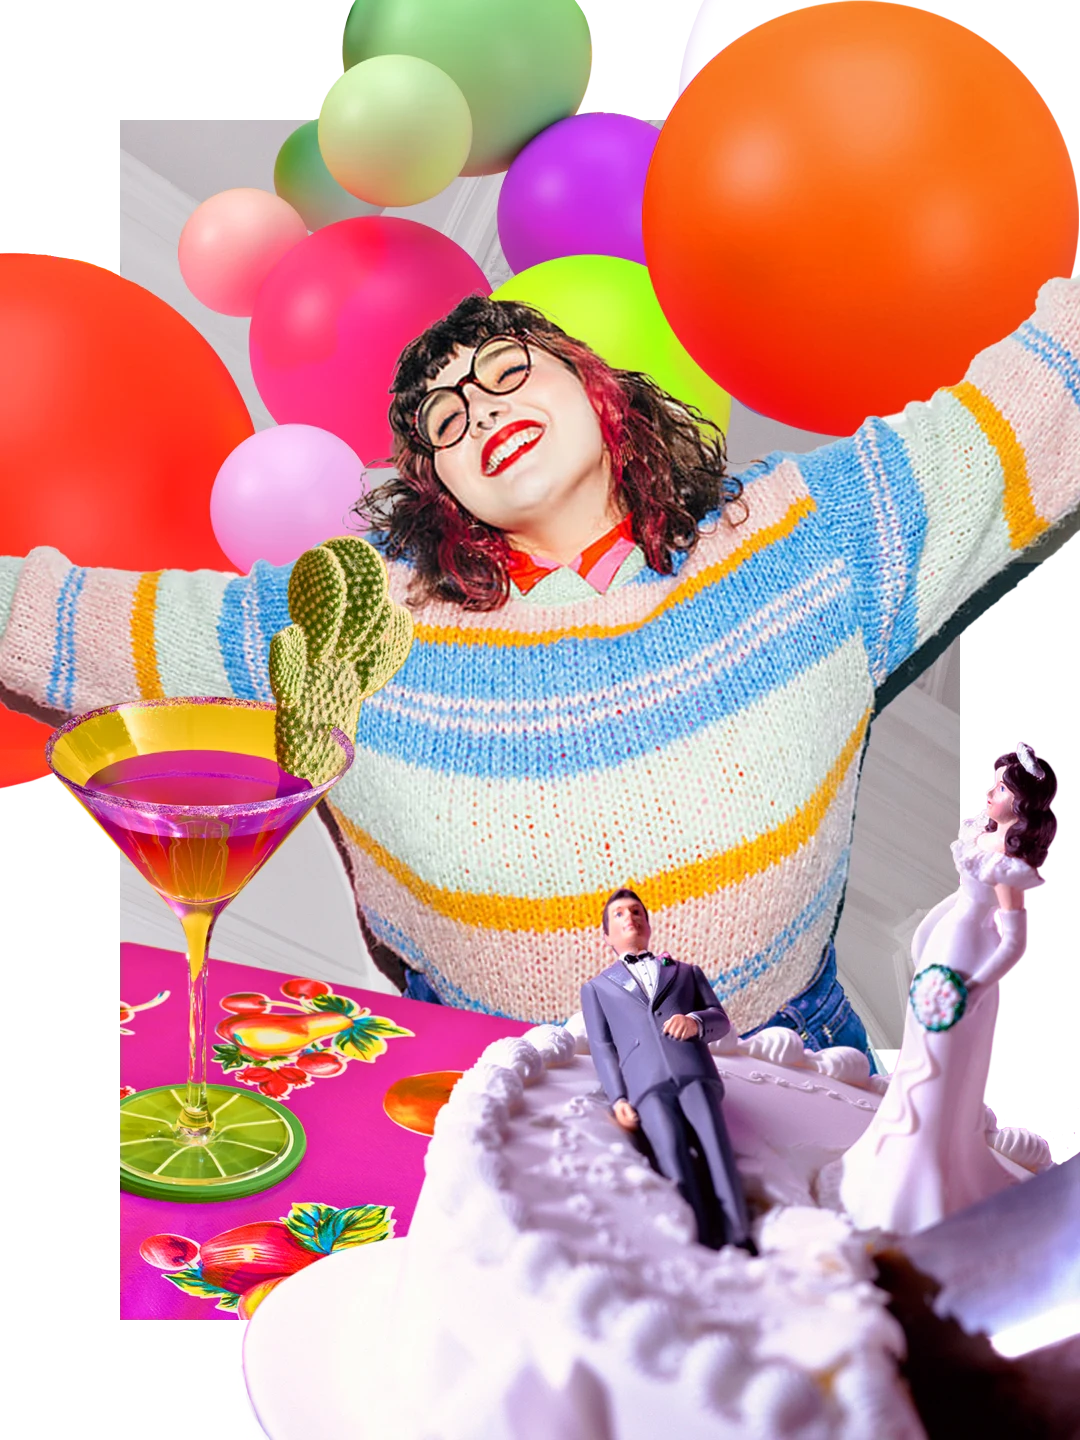 White woman at center smiles and holds out her arms. Martini on a multicolored table cloth. Cake with male and female figurines. Balloons of different bright colors at top.
